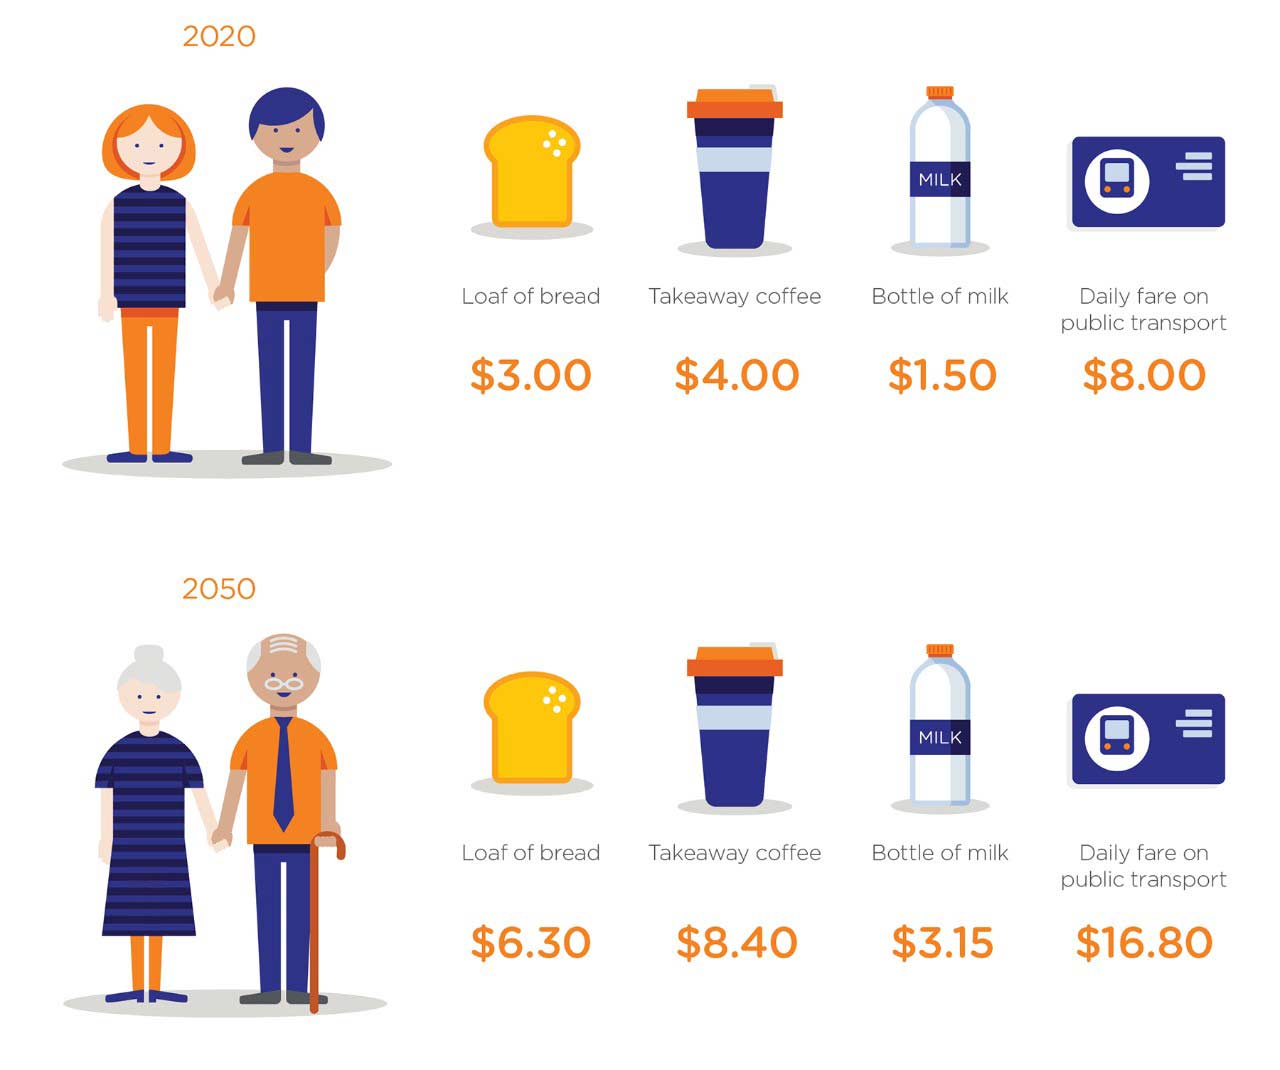 The projected costs of bread, coffee, water and transport in 30 years’ time, in 2050 compared to 2020. A loaf of bread is expected to be $6.30 in 2050, and a bottle of milk $3.15 – both over 50% more than the average cost in 2020.